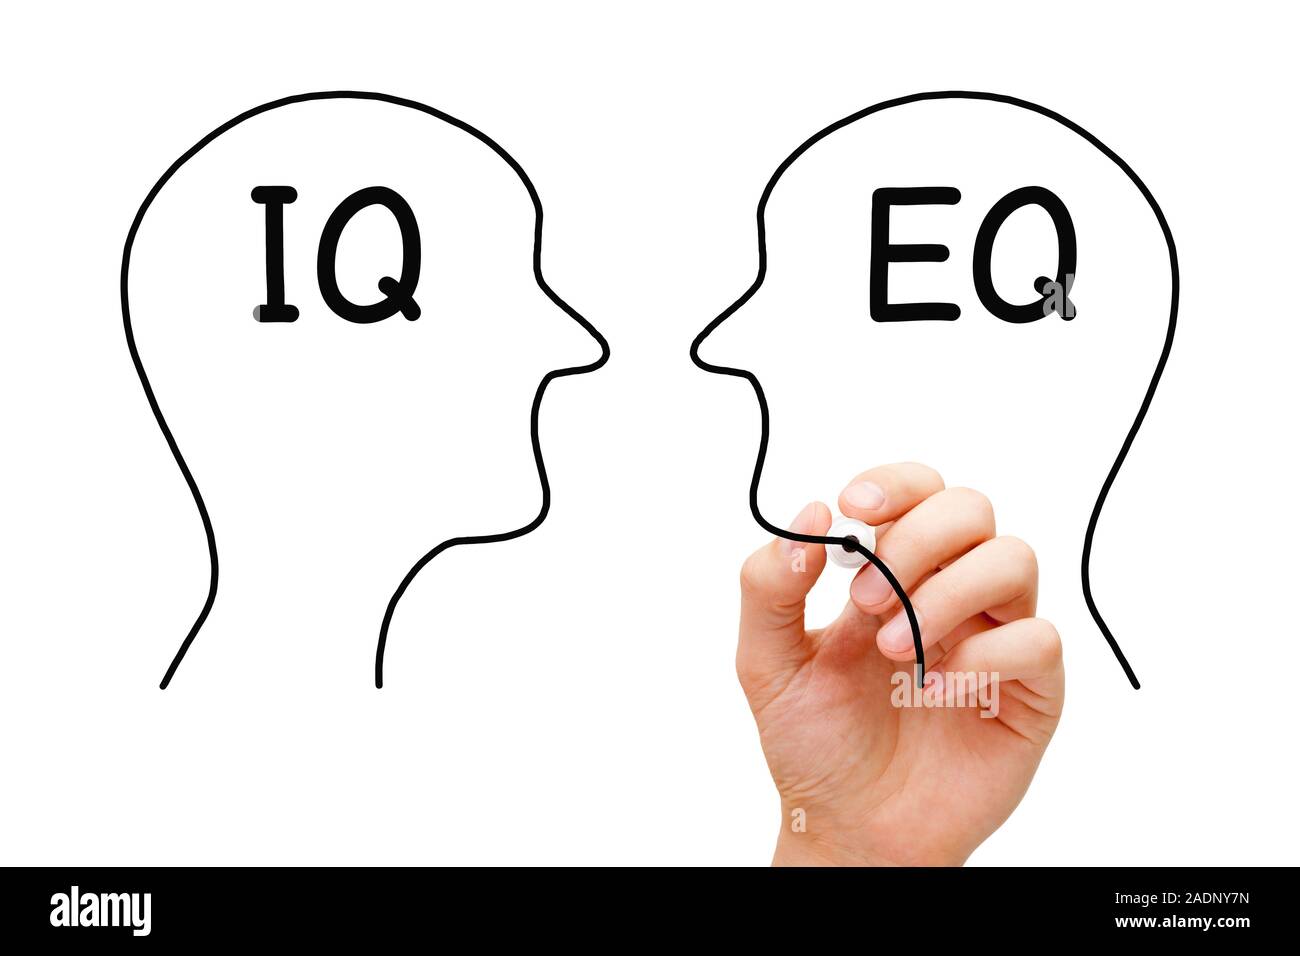 Hand drawing IQ intelligence quotient versus EQ emotional intelligence quotient concept with marker on transparent wipe board isolated on white backgr Stock Photo